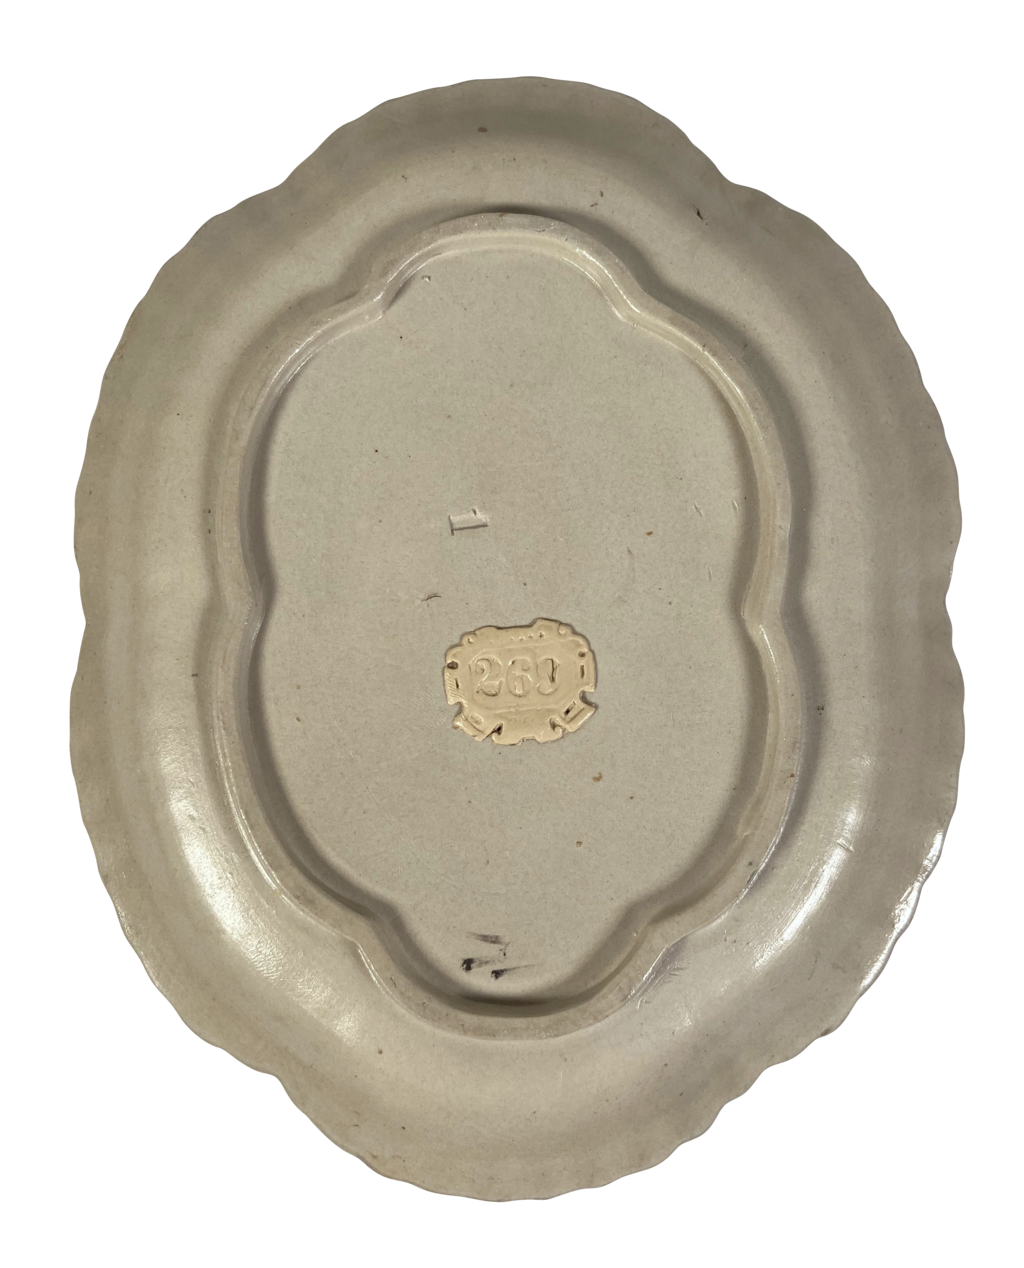 Fluted Stoneware Lidded Butter Dish with Scallop Edges and Silverleaf Overlay Decoration